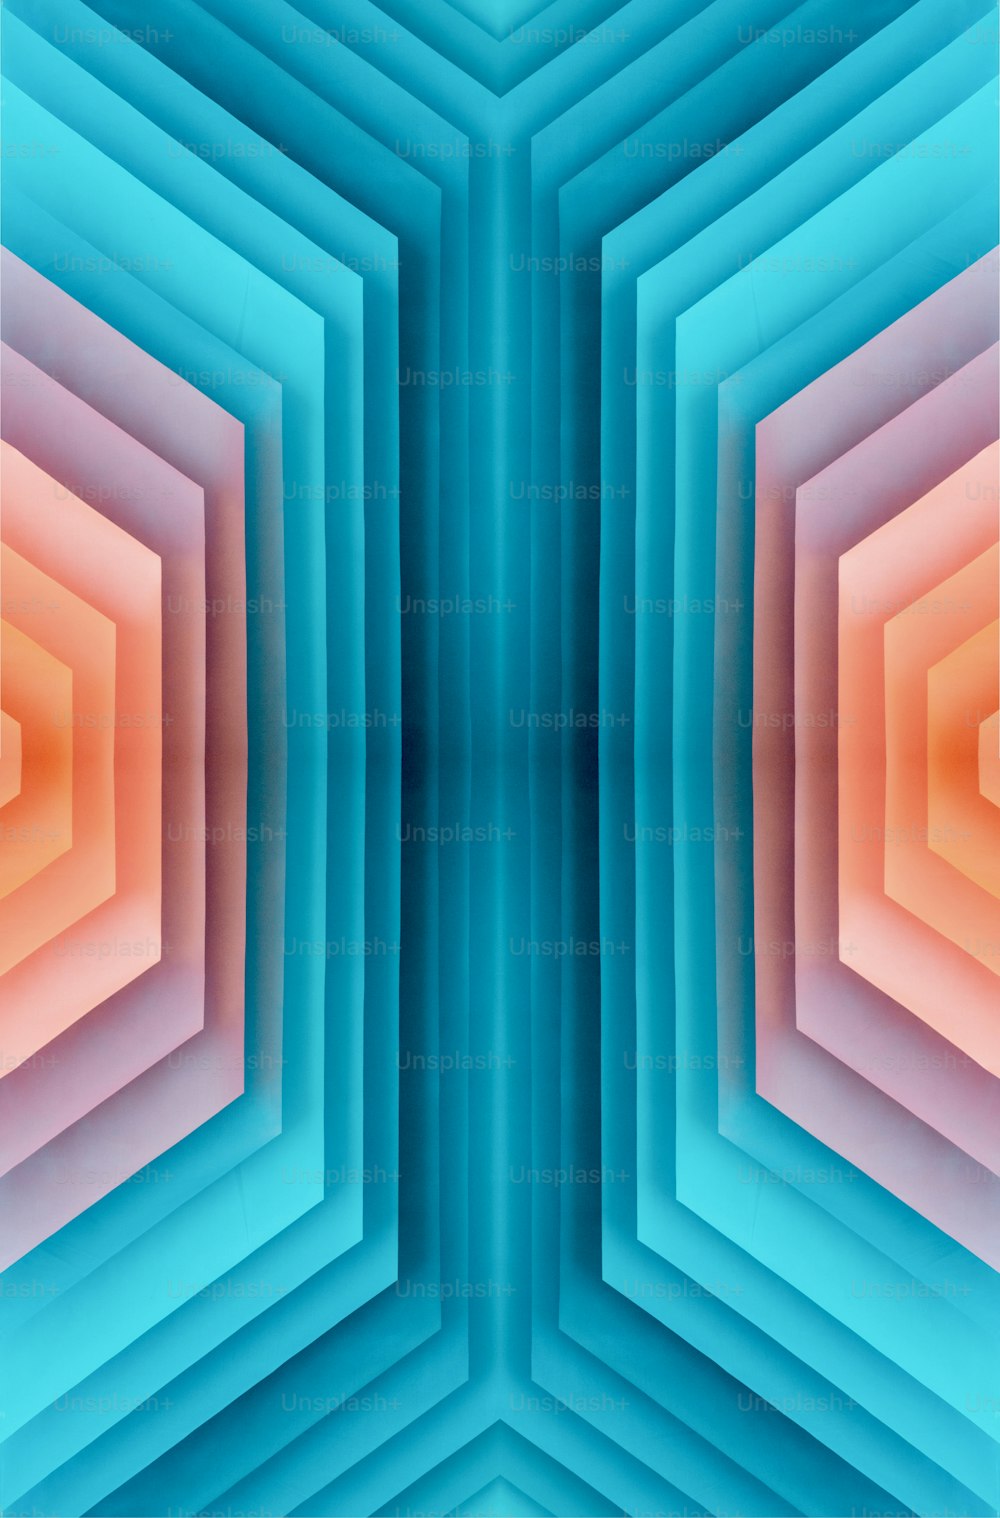 an abstract image of a blue and orange hexagonal structure